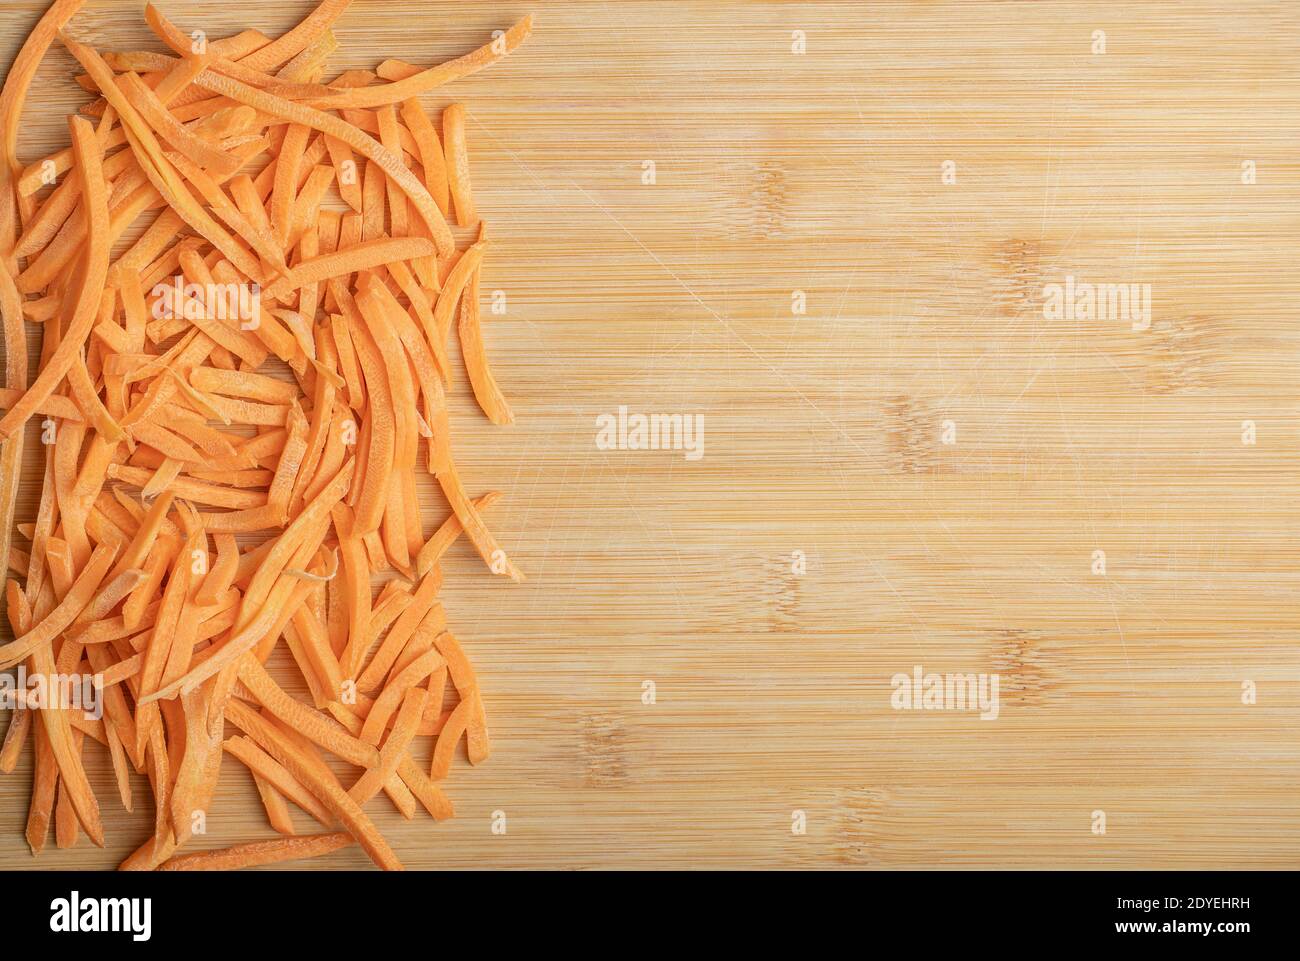 Julienne carrots on the wooden background Stock Photo